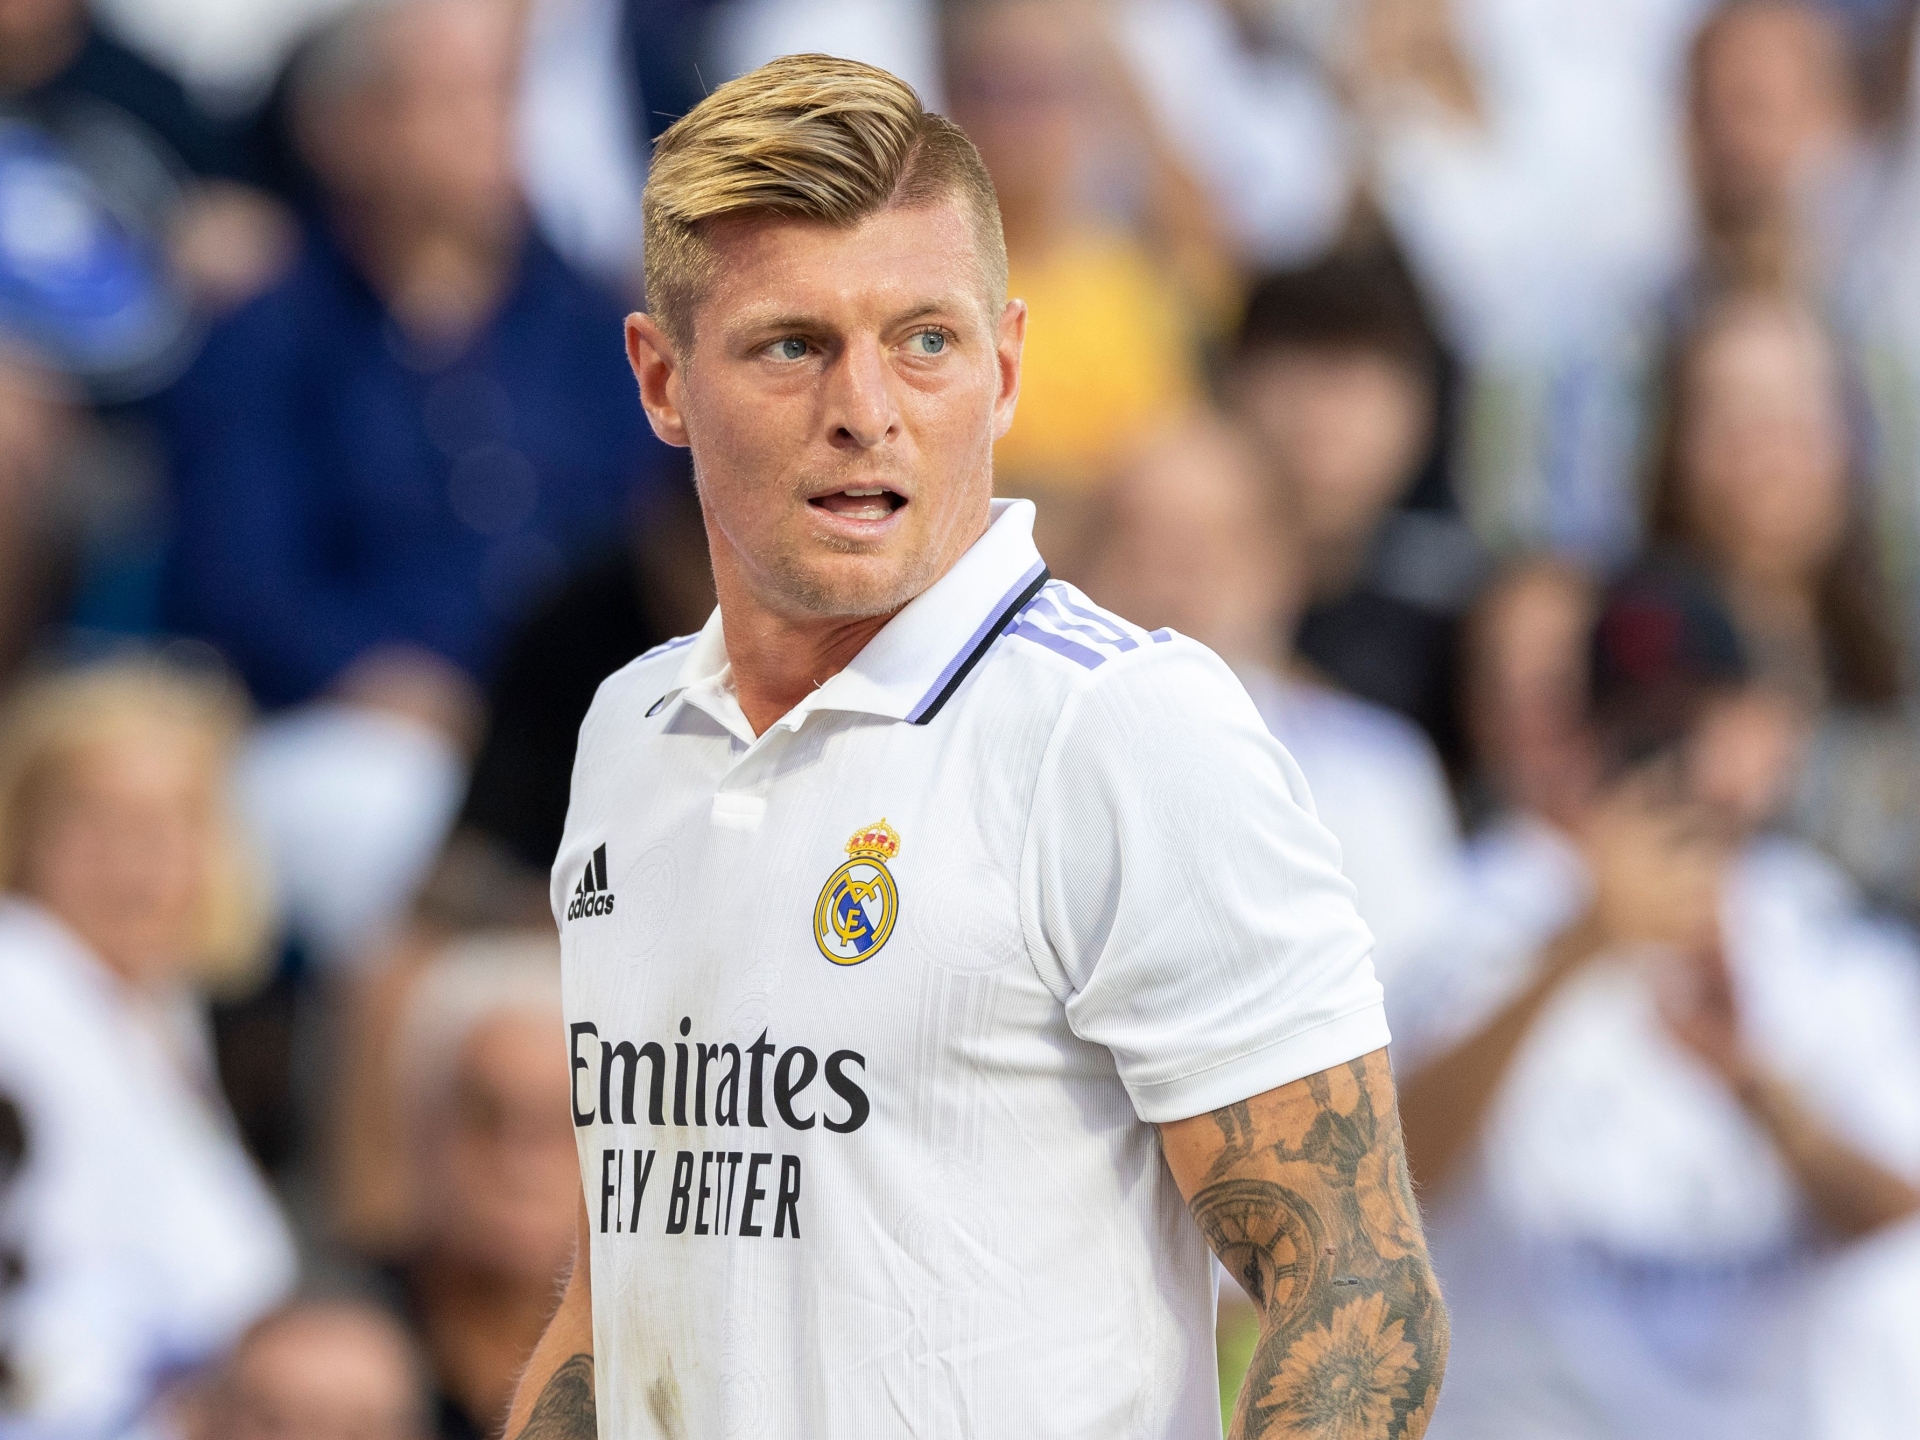 Man City 'keen on Toni Kroos' and can land Real Madrid star in free transfer this summer as he runs down contract. The US Sun